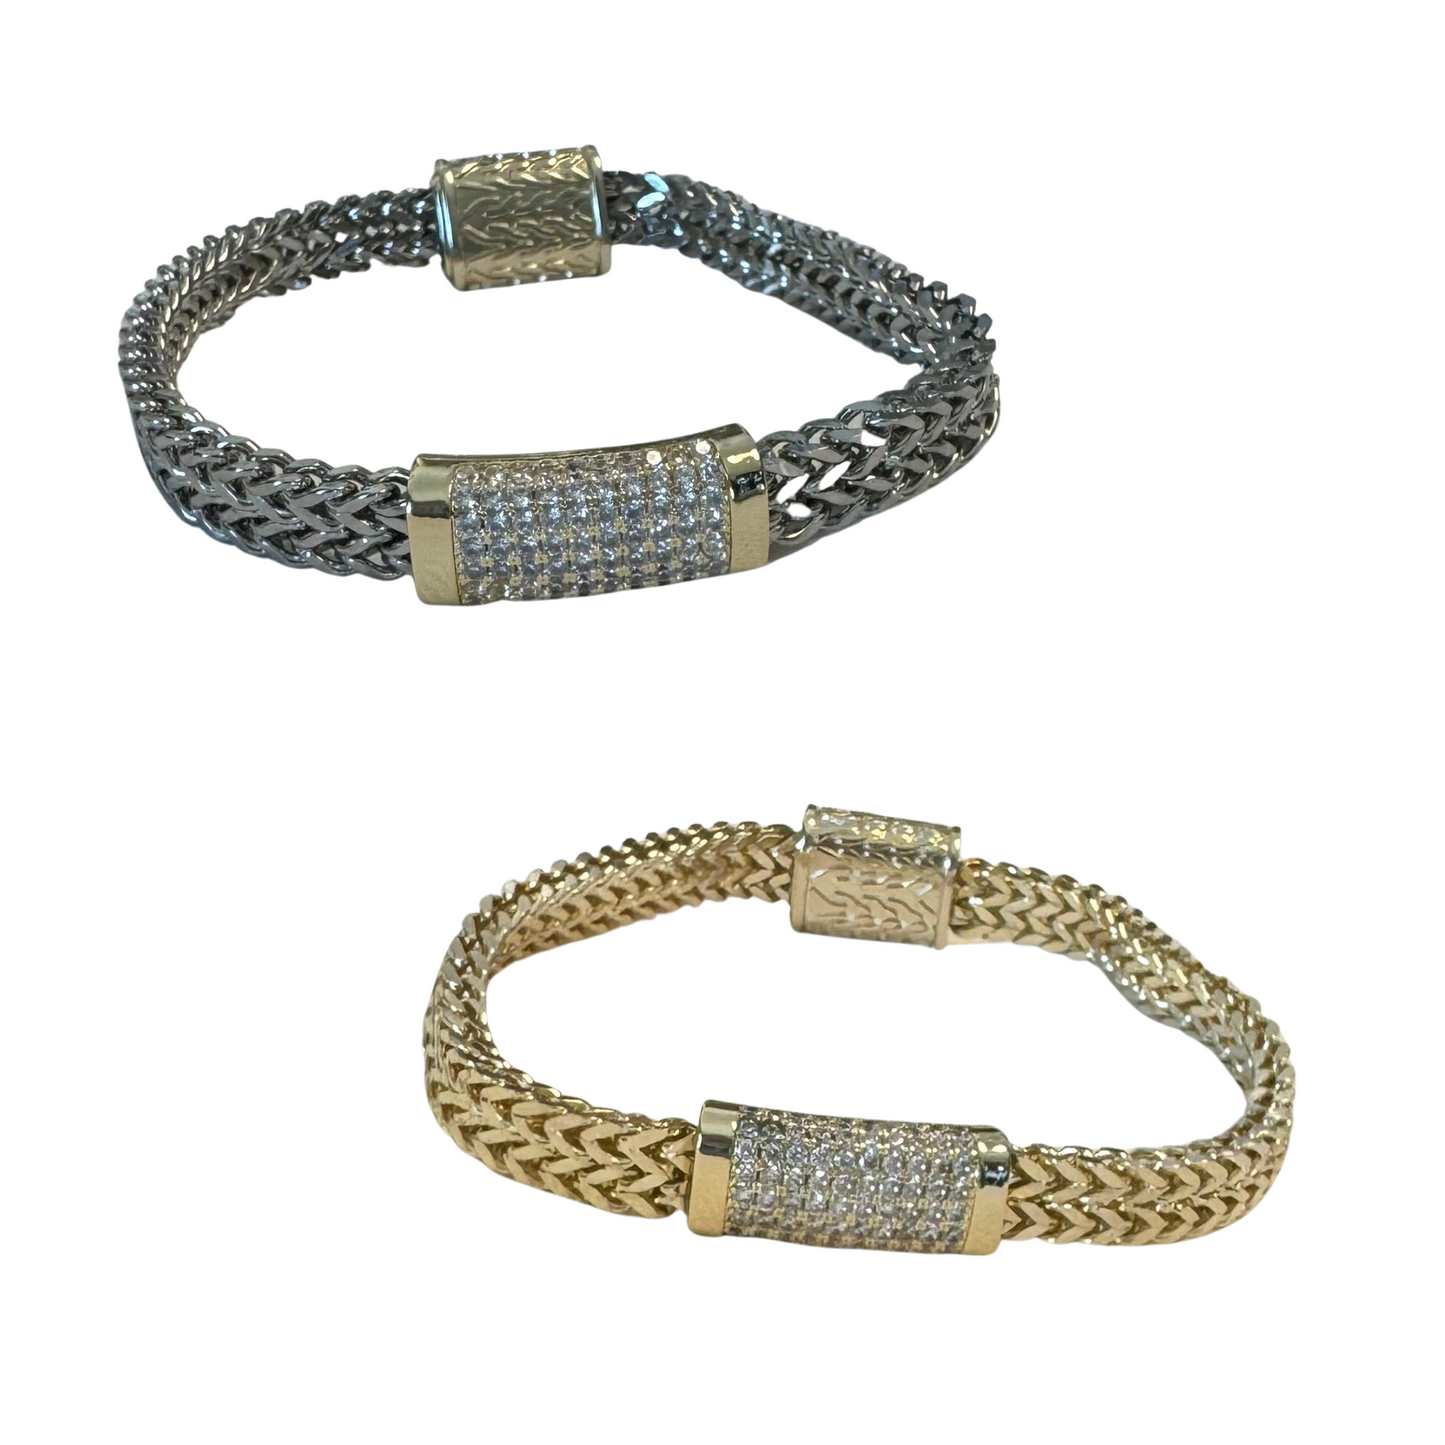 This Snake Chain Bracelet is a versatile piece of jewelry, available in either silver or gold. It features a rhinestone bar accent and a secure magnetic closure, perfect for any occasion.